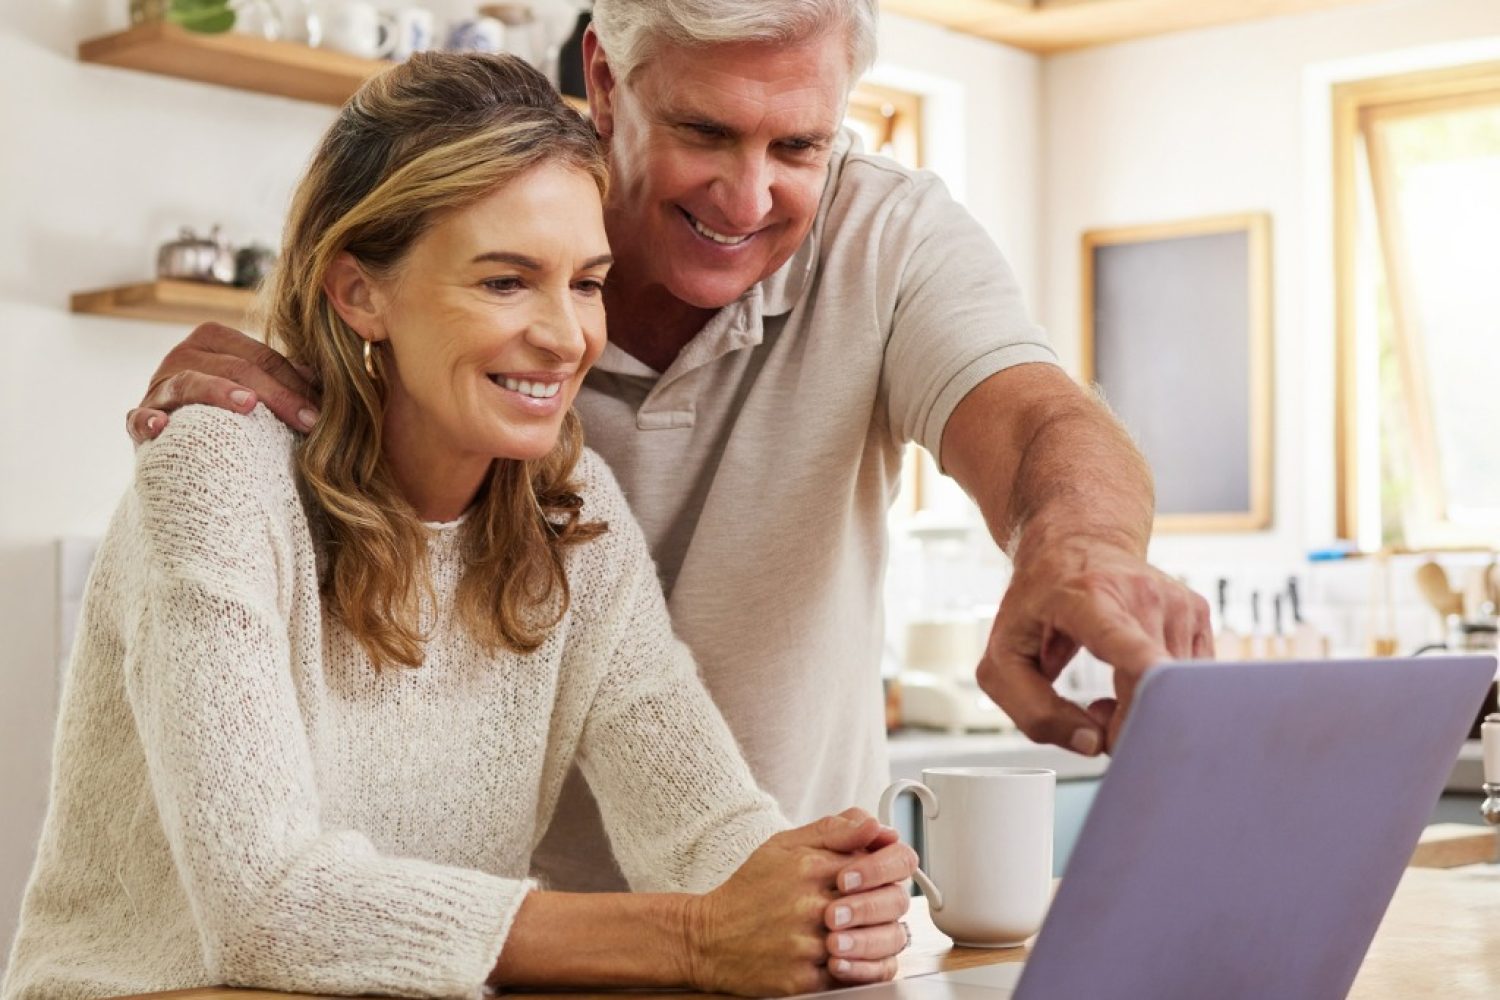 happy-pension-couple-with-laptop-and-paperwork-for-retirement-planning-online-ecommerce.jpg_s=1024x1024&w=is&k=20&c=2_JtK0aTI490GEgqoViYoX44R9nRX6v6L4J4YvgB_80=